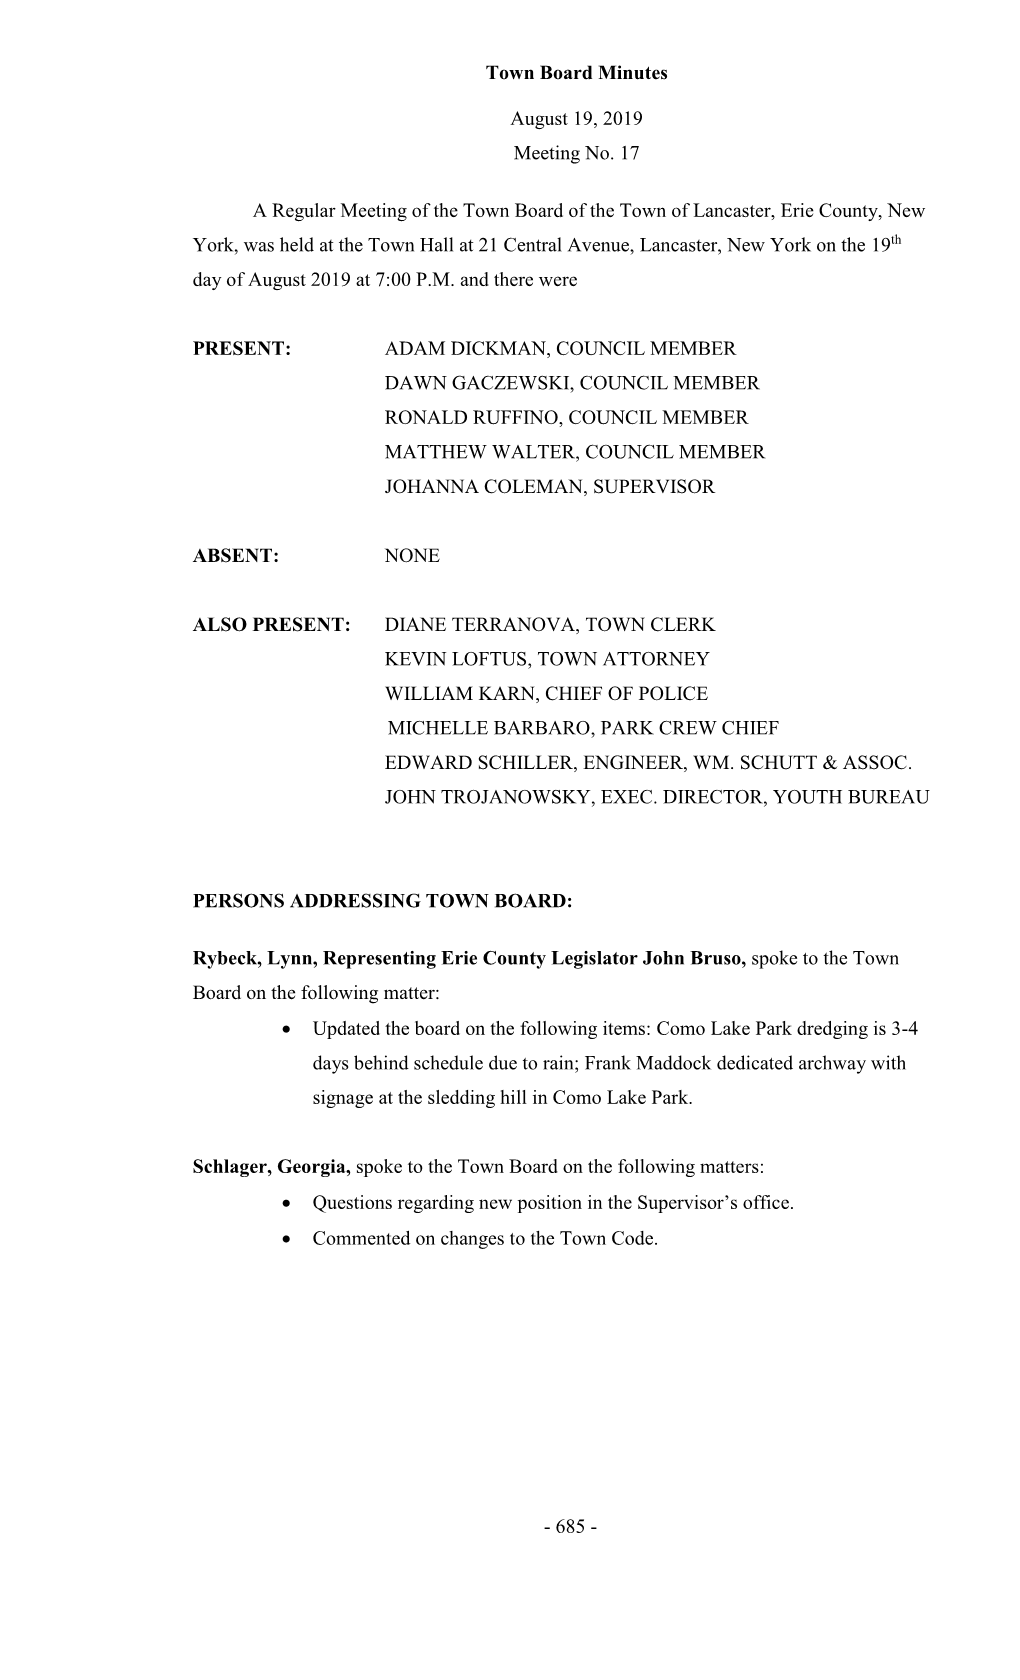 Town Board Minutes August 19, 2019 Meeting No. 17